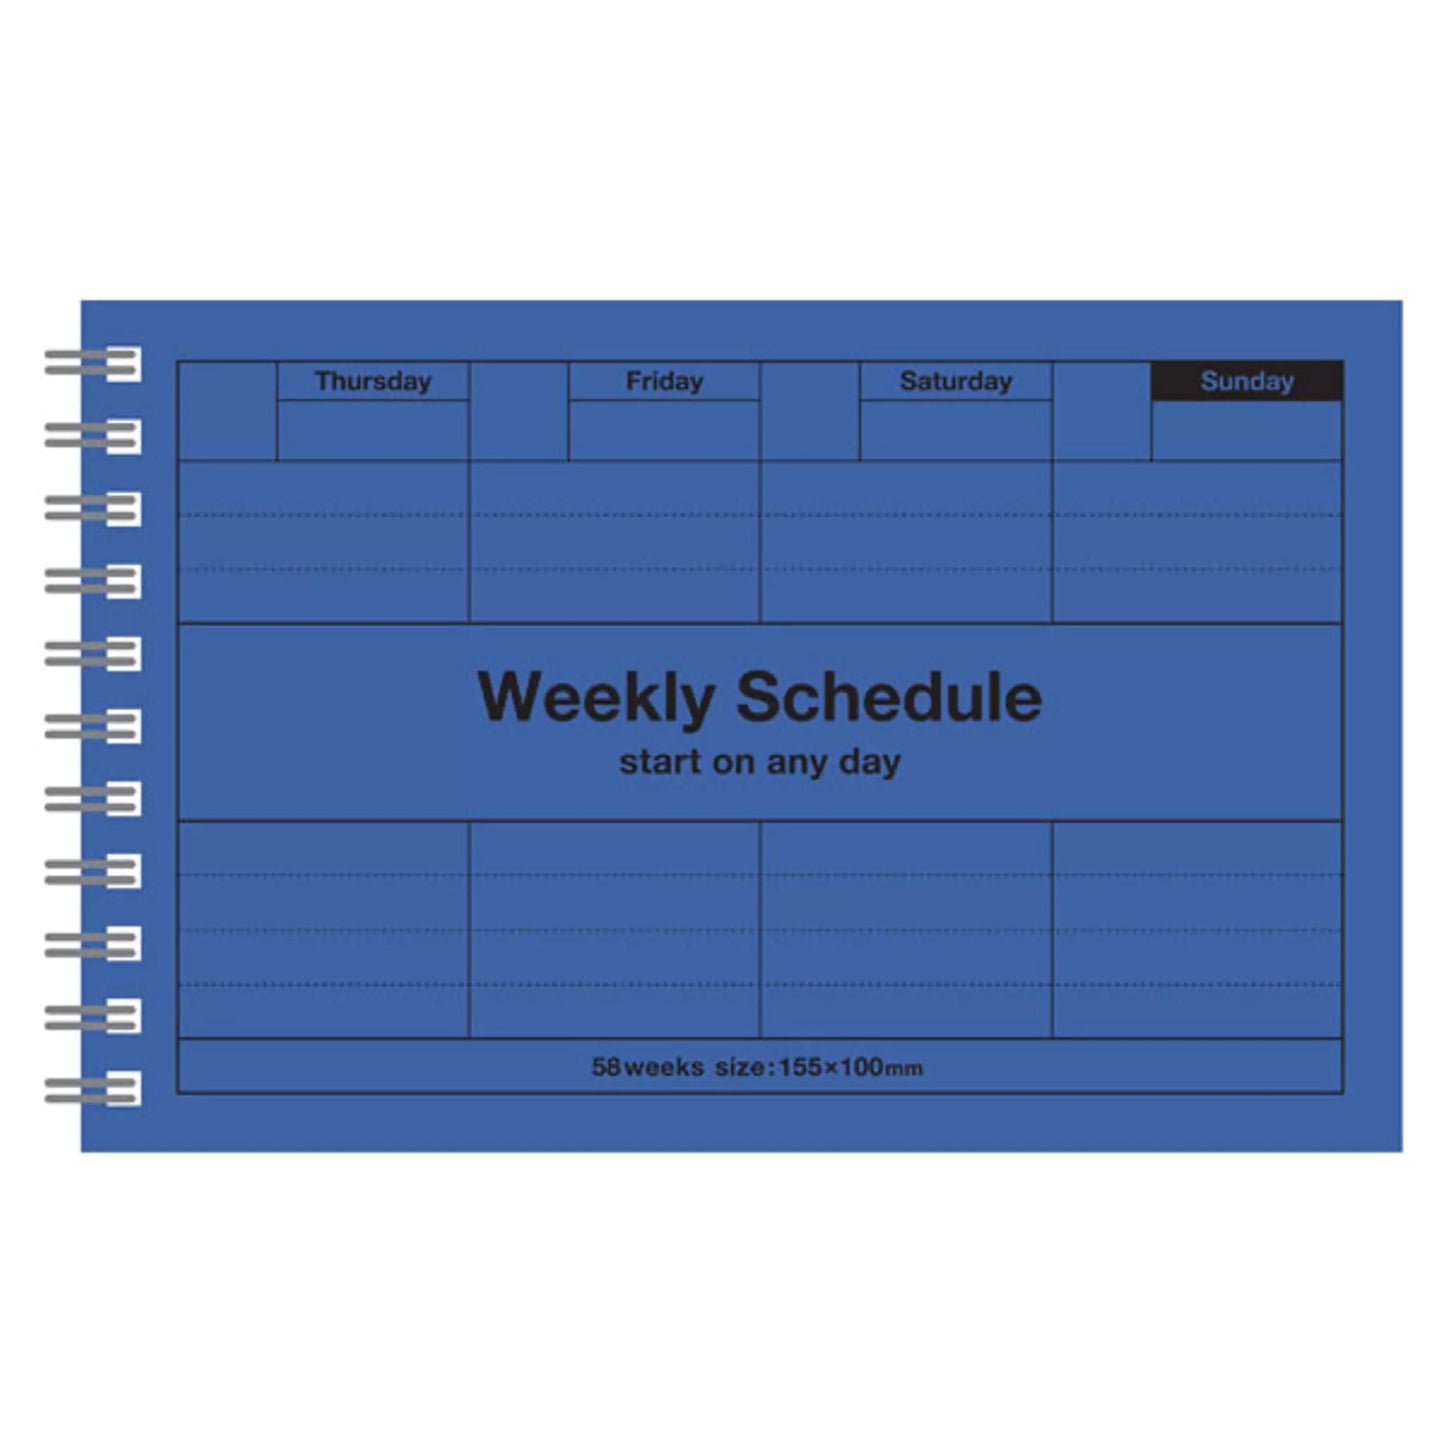 Weekly Schedule - 2 Colours